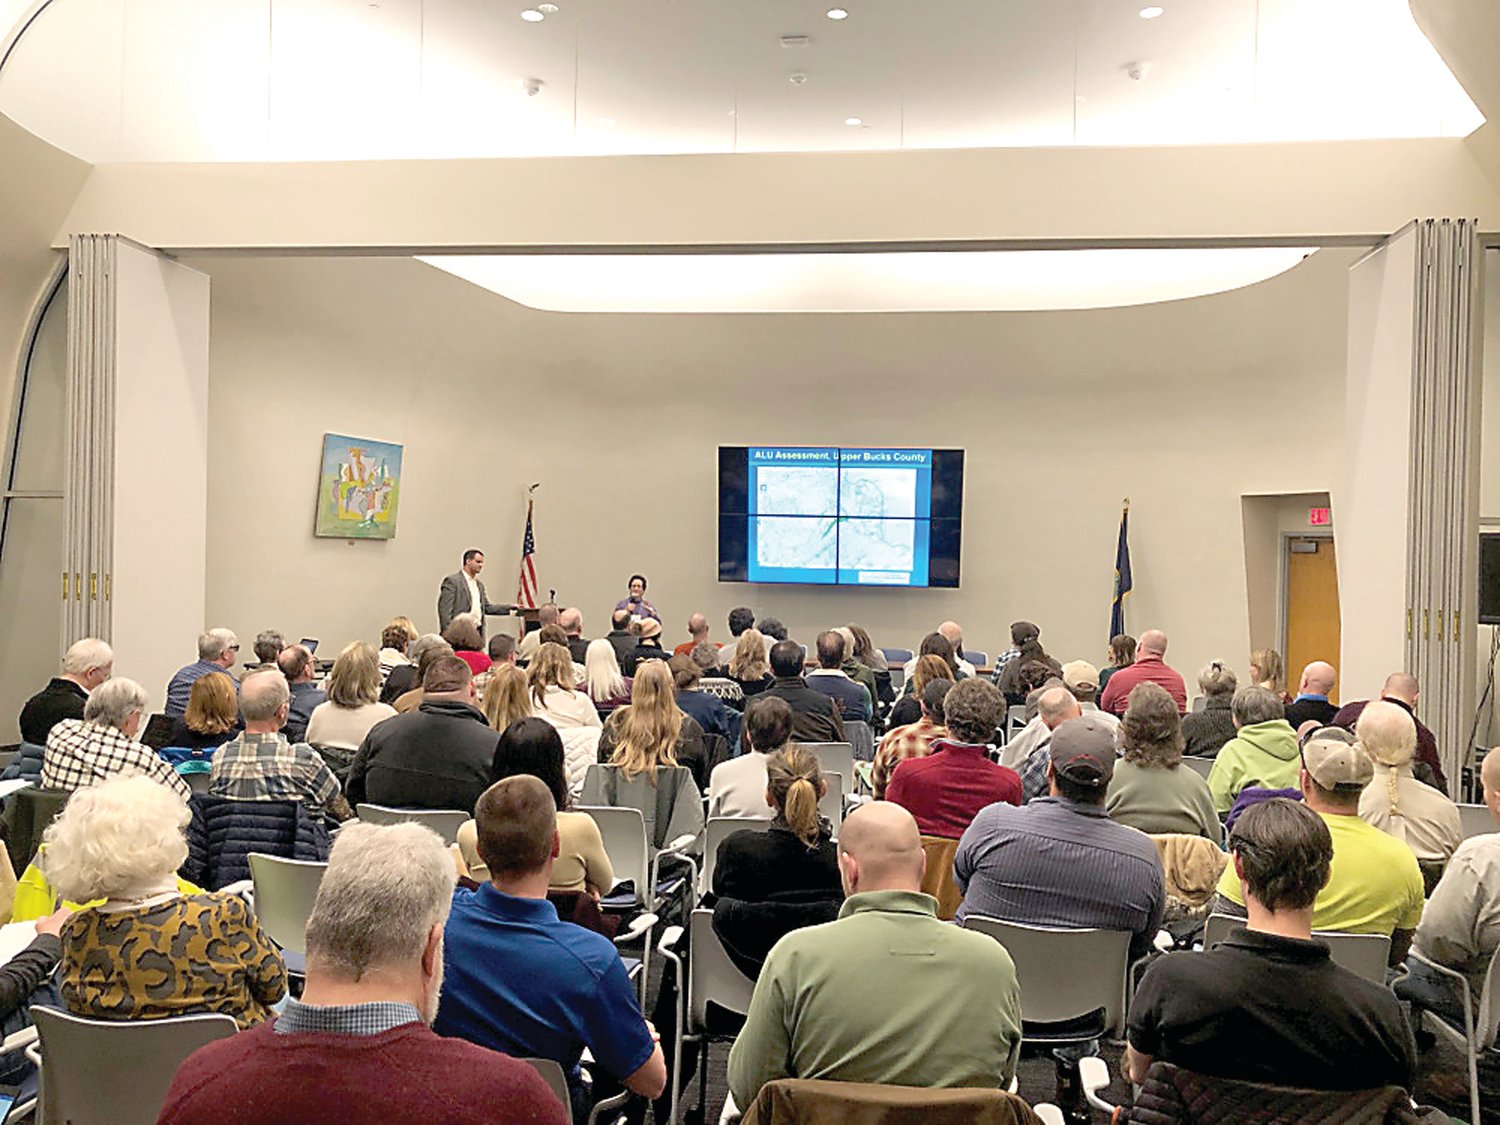 Over 80 municipal and community leaders learn about the important role meadows can play in stormwater management with Susan Myerov from Pennsylvania Environmental Council and Erik Garton from Gilmore and Associates.